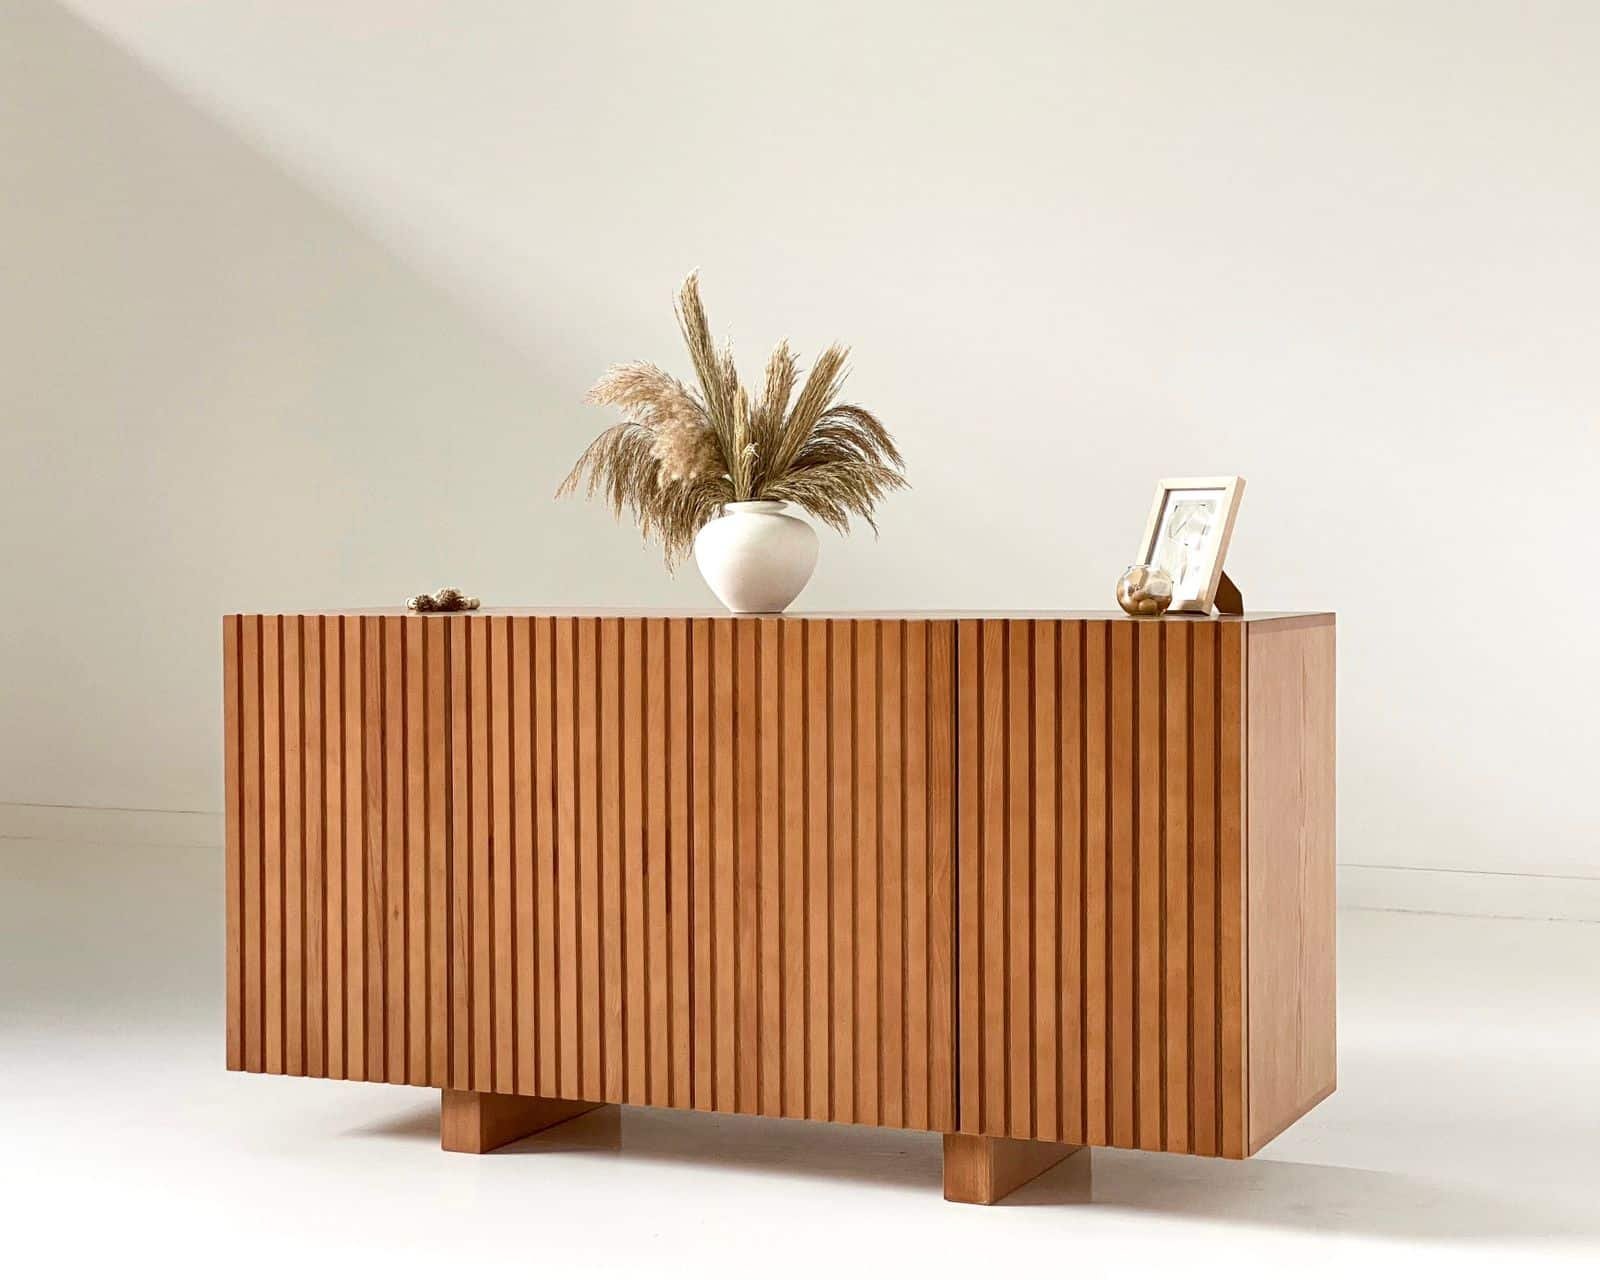 Slatted Buffet, a stylish and versatile addition to your dining area or living space. Crafted with premium materials and attention to detail, this buffet combines modern design with practical functionality to enhance your home decor